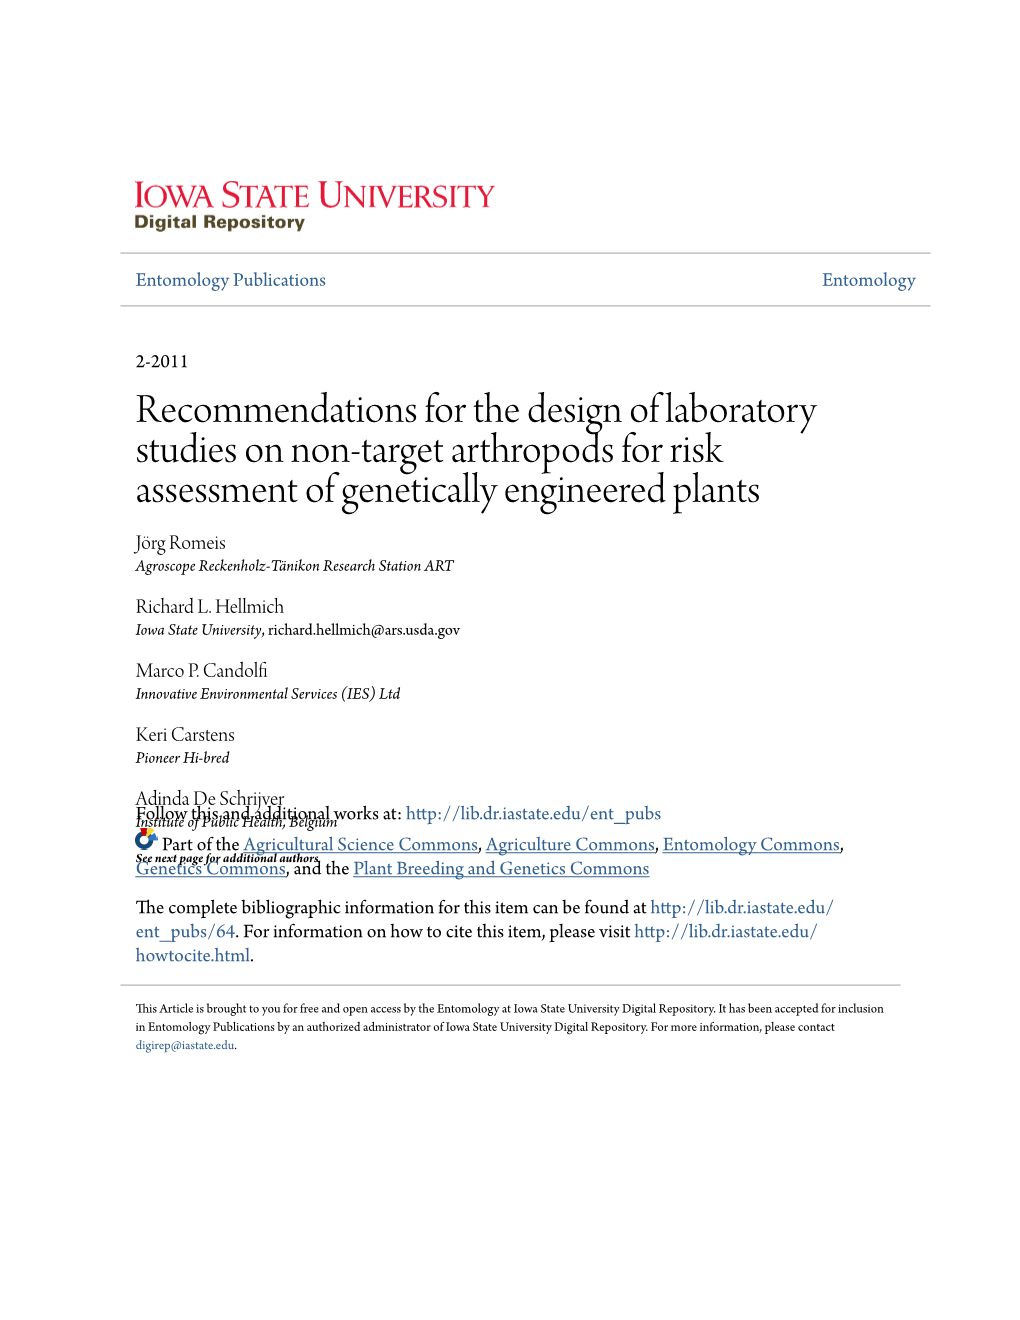 Recommendations for the Design of Laboratory Studies on Non-Target